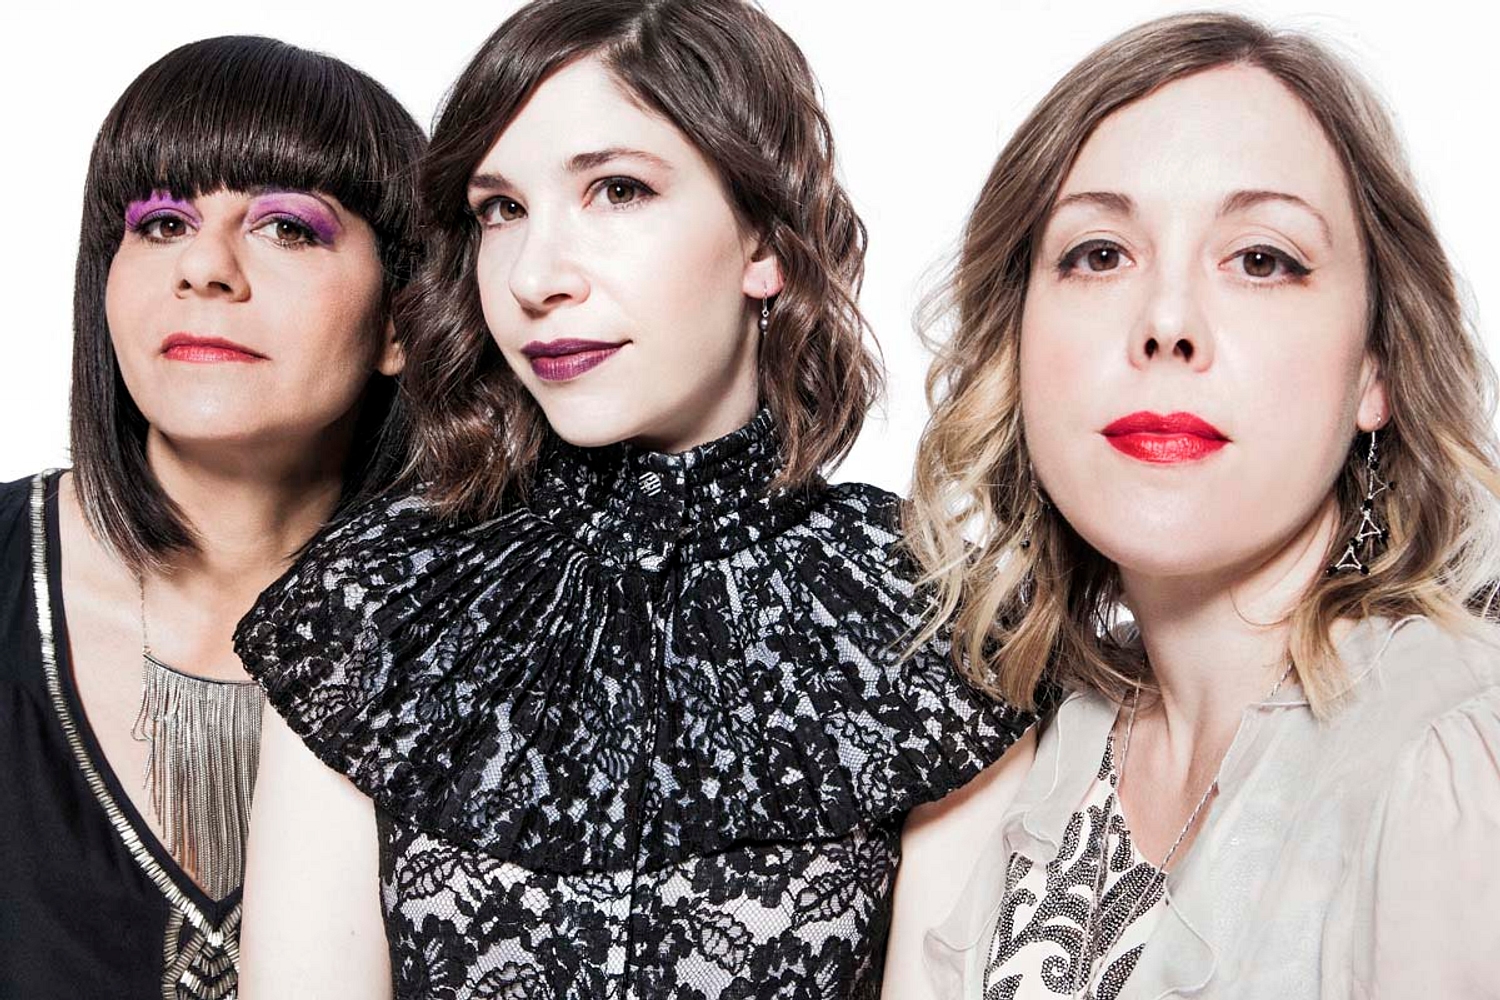 Drum along to Sleater-Kinney, help the needy in Oregon